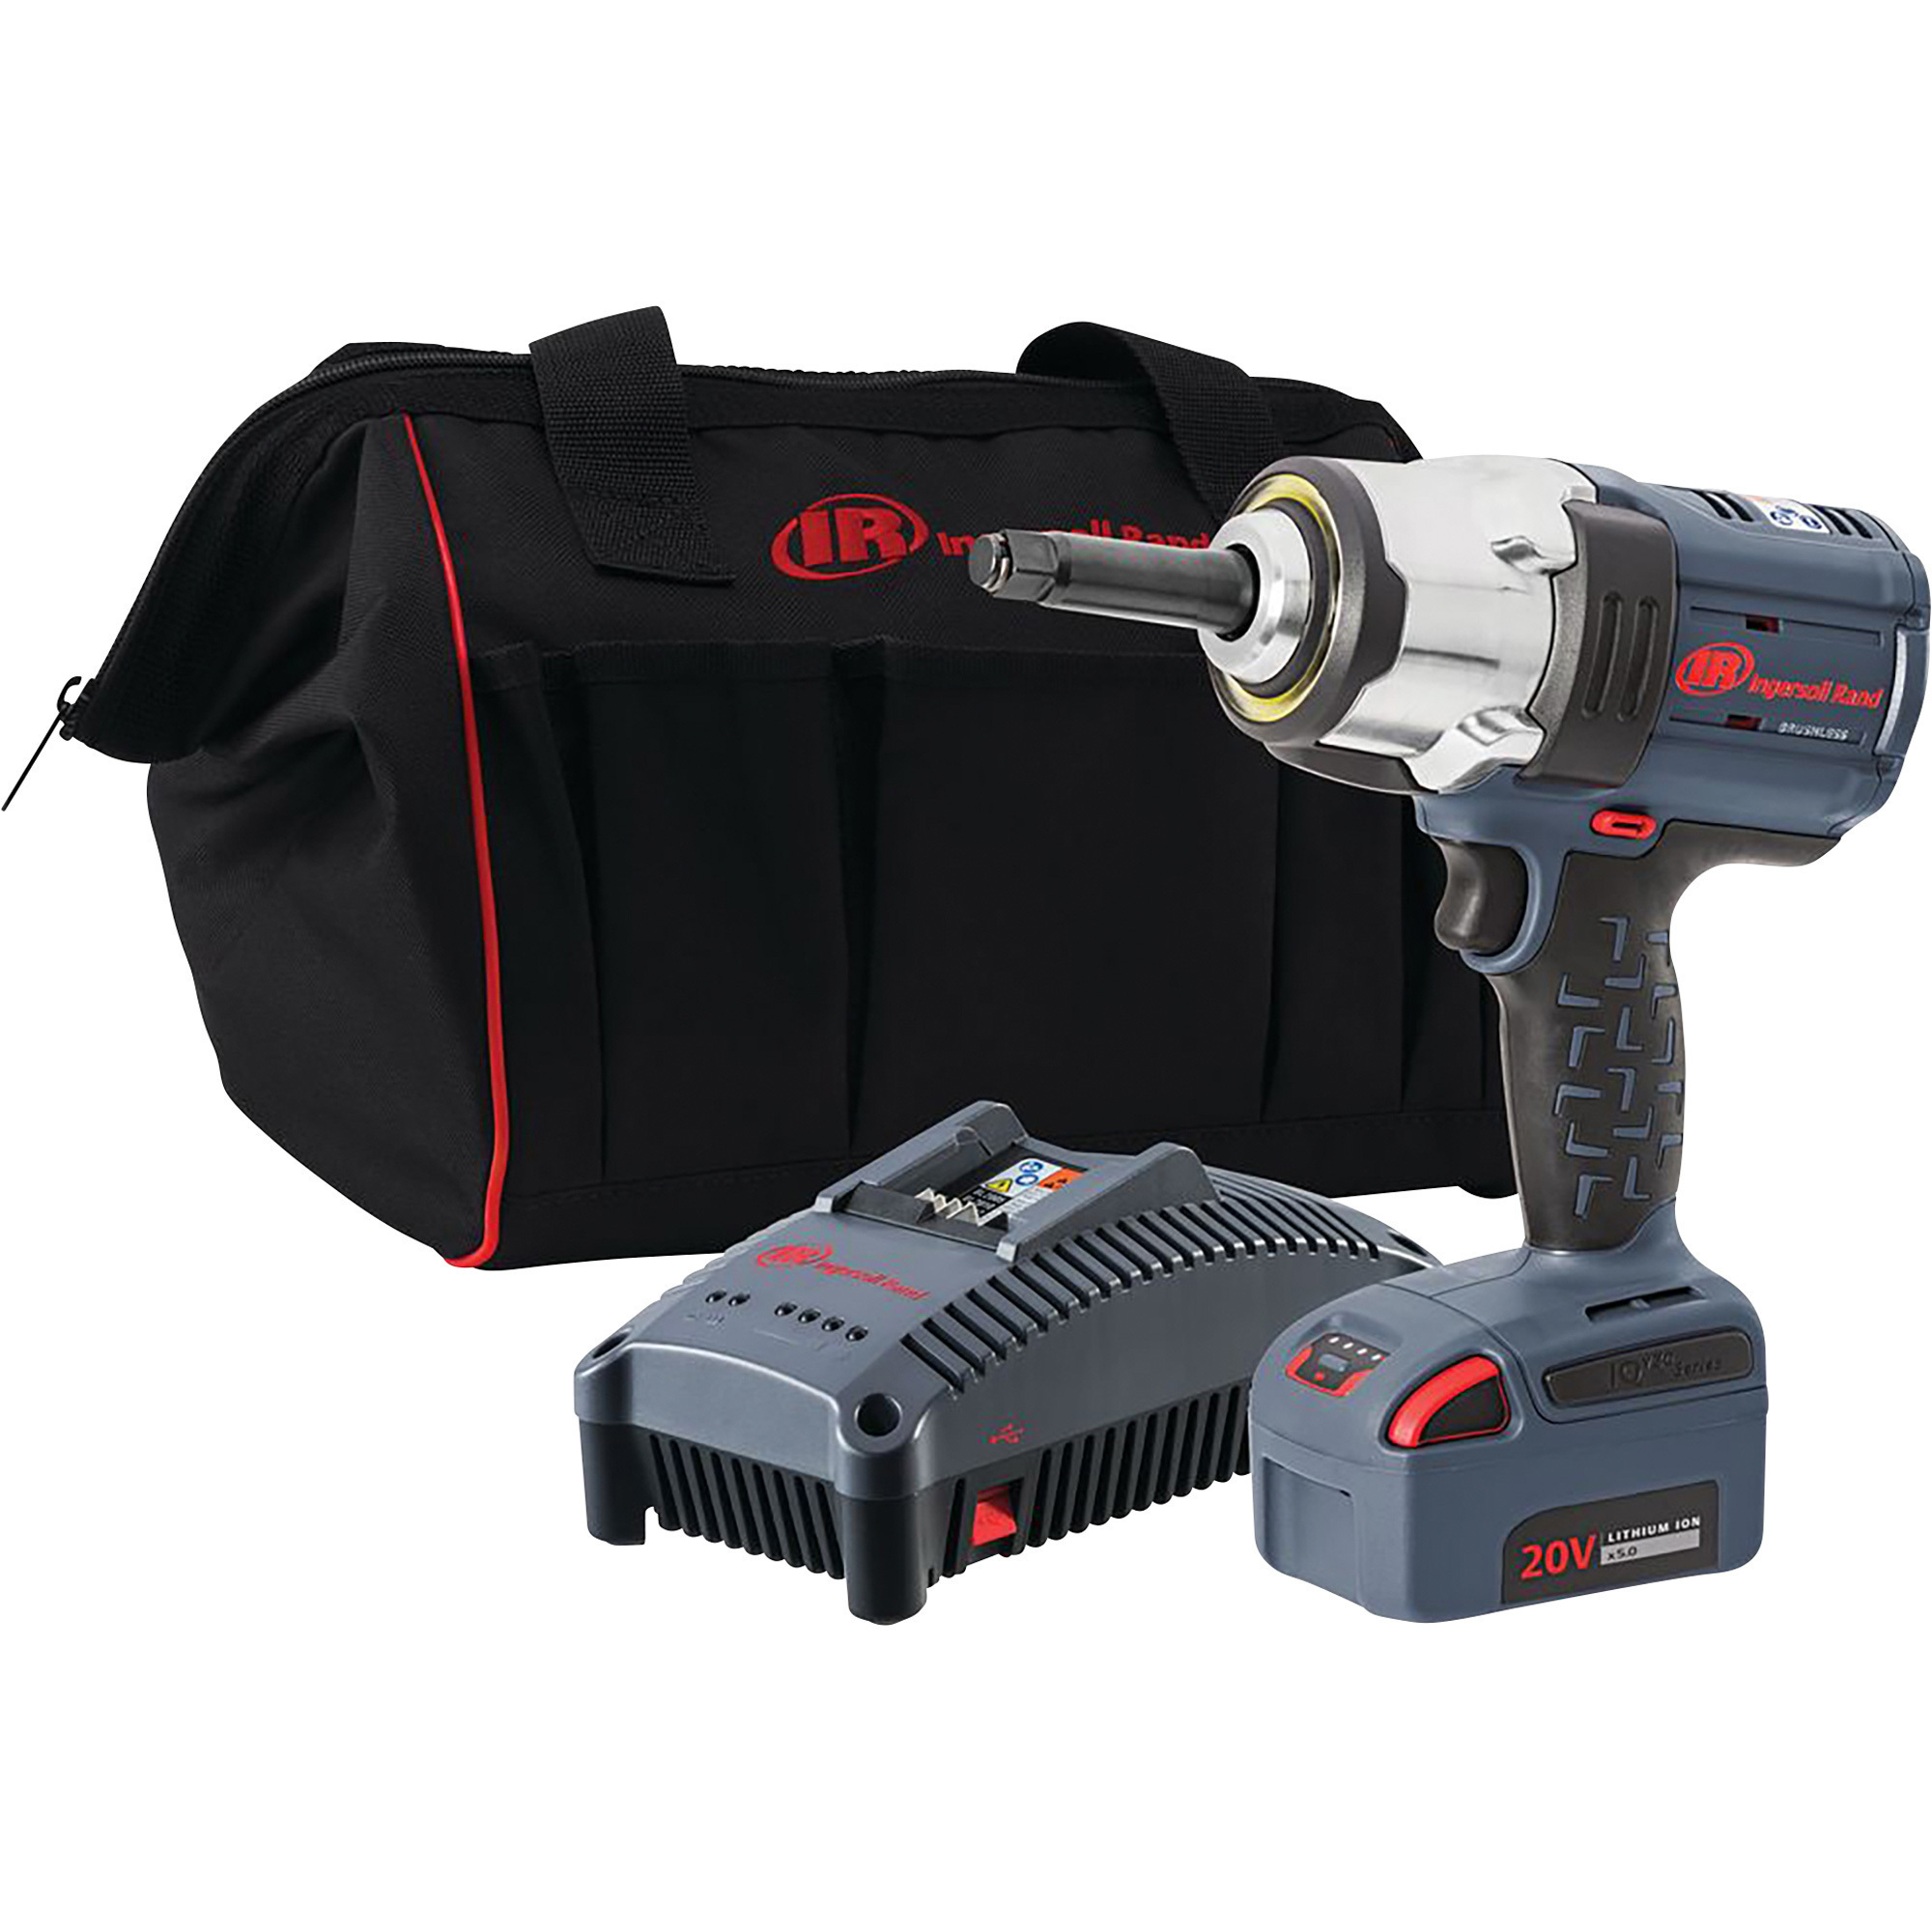 Ingersoll Rand High-Torque 20V Cordless Impact Wrench Kit, 1/2Inch Drive, 1000 Ft./Lbs. Max Torque, 1 Battery, Model W7152-K12